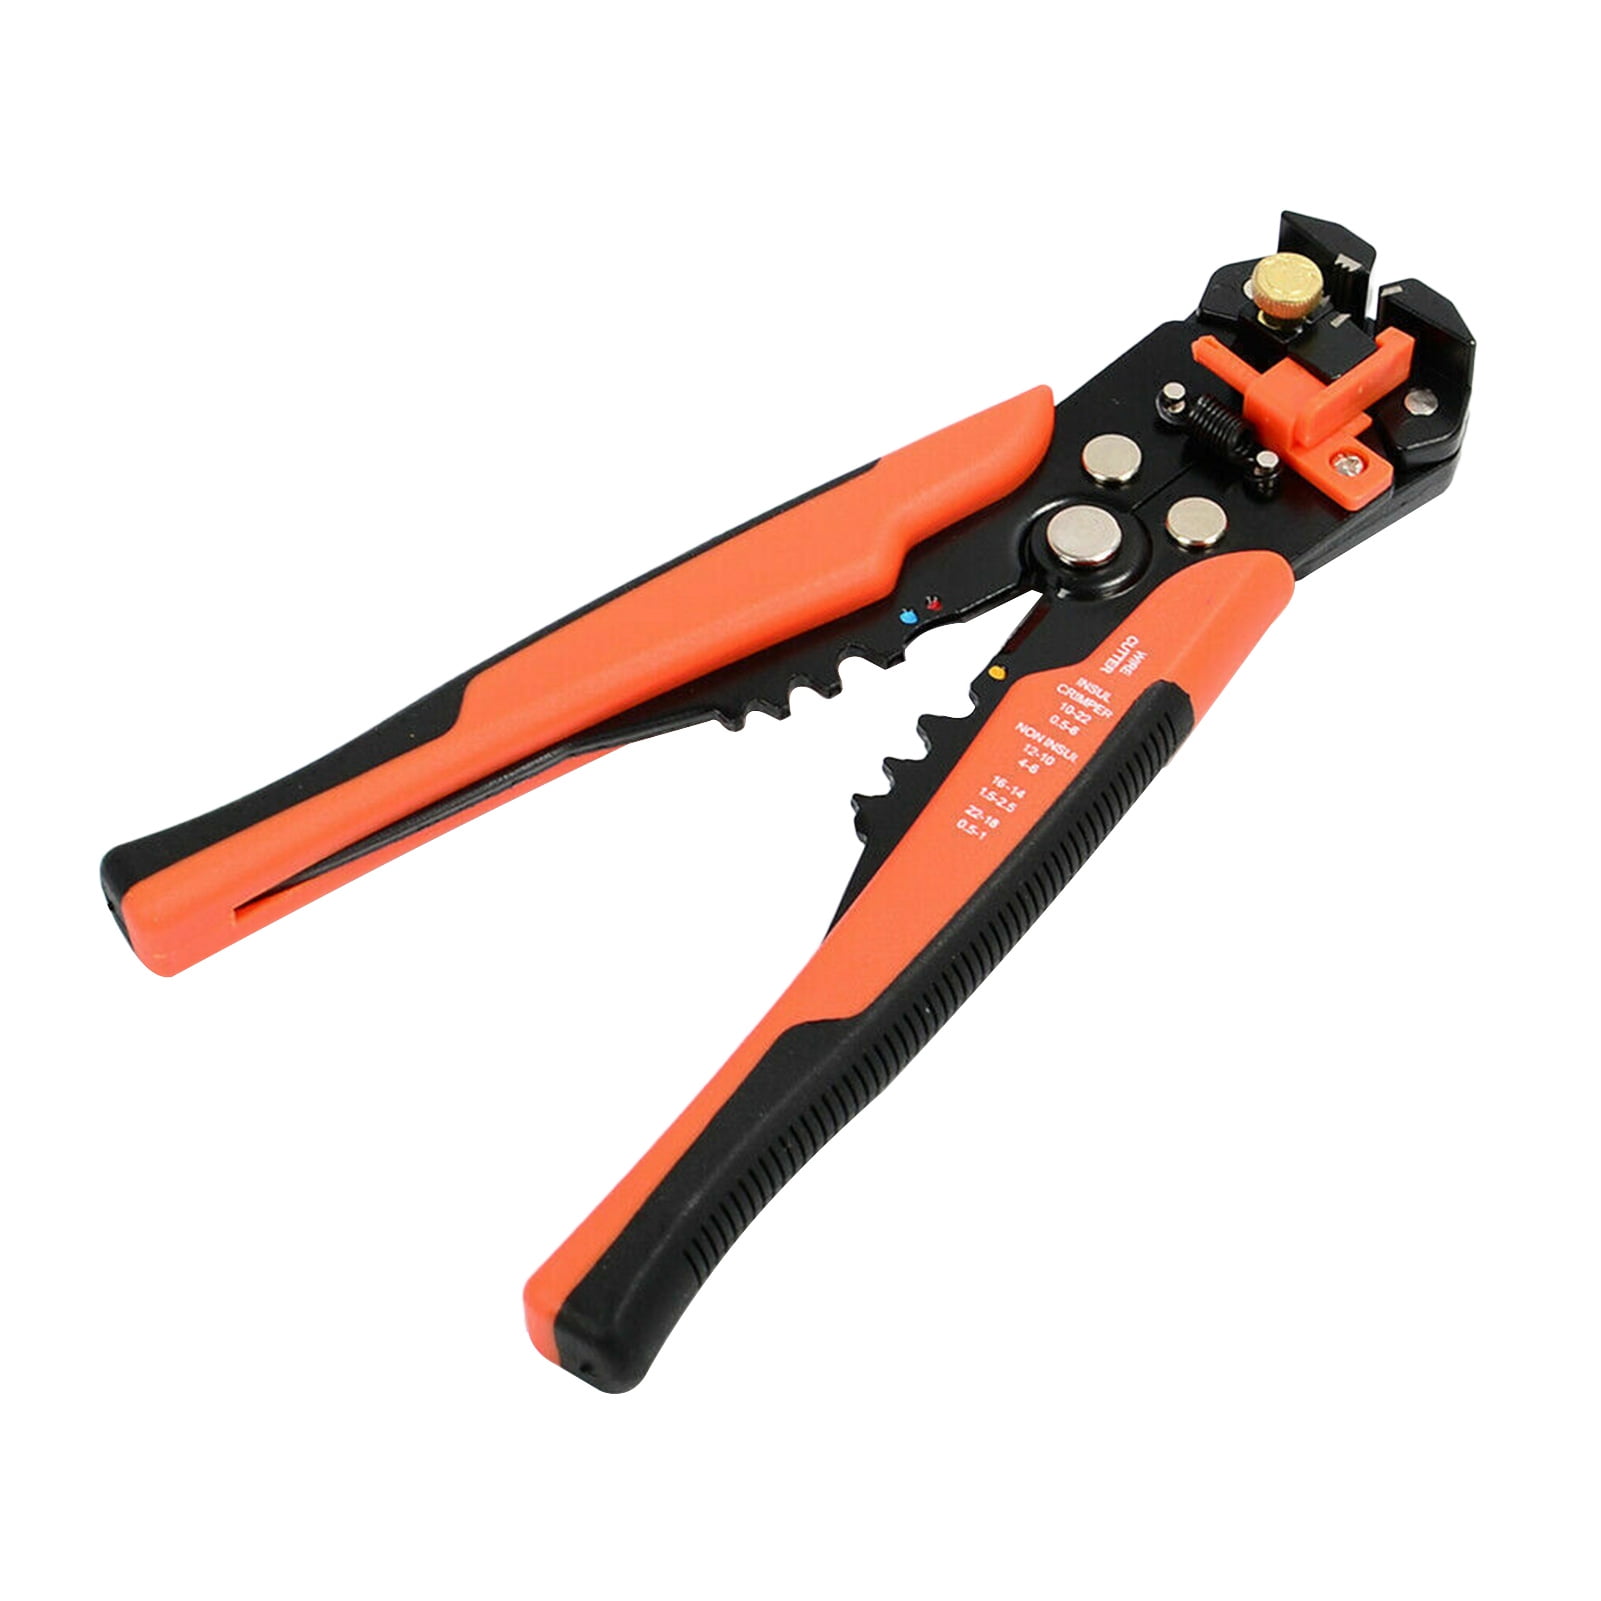 8" CRIMPING PLIERS Large Heavy Duty Wire Cutter Stripper Insulated Ignition Tool 